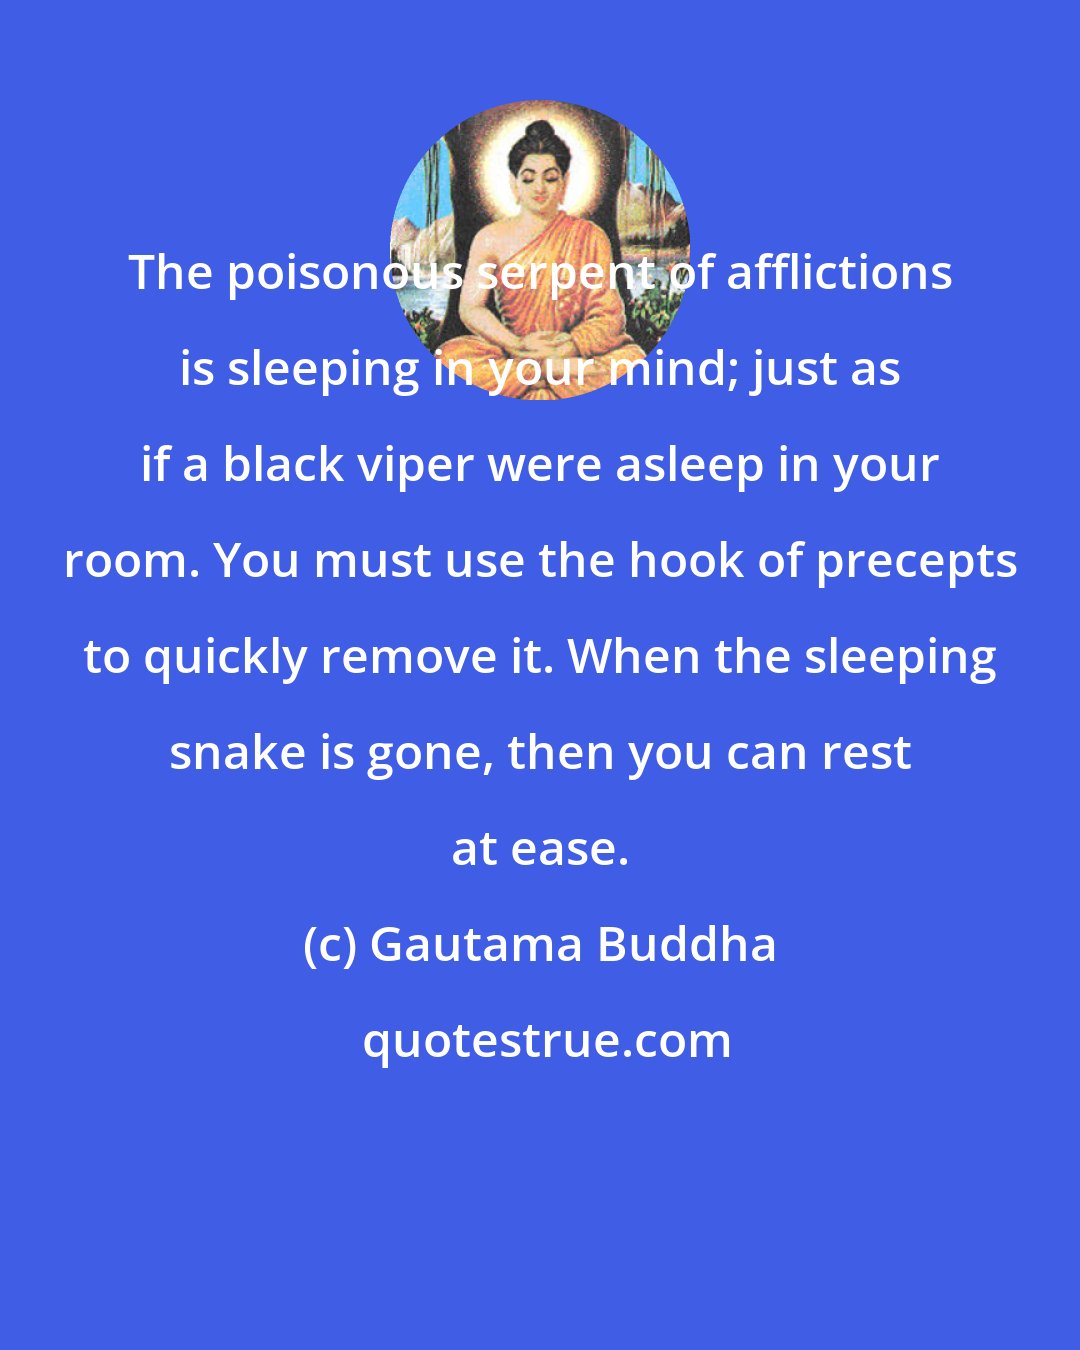 Gautama Buddha: The poisonous serpent of afflictions is sleeping in your mind; just as if a black viper were asleep in your room. You must use the hook of precepts to quickly remove it. When the sleeping snake is gone, then you can rest at ease.